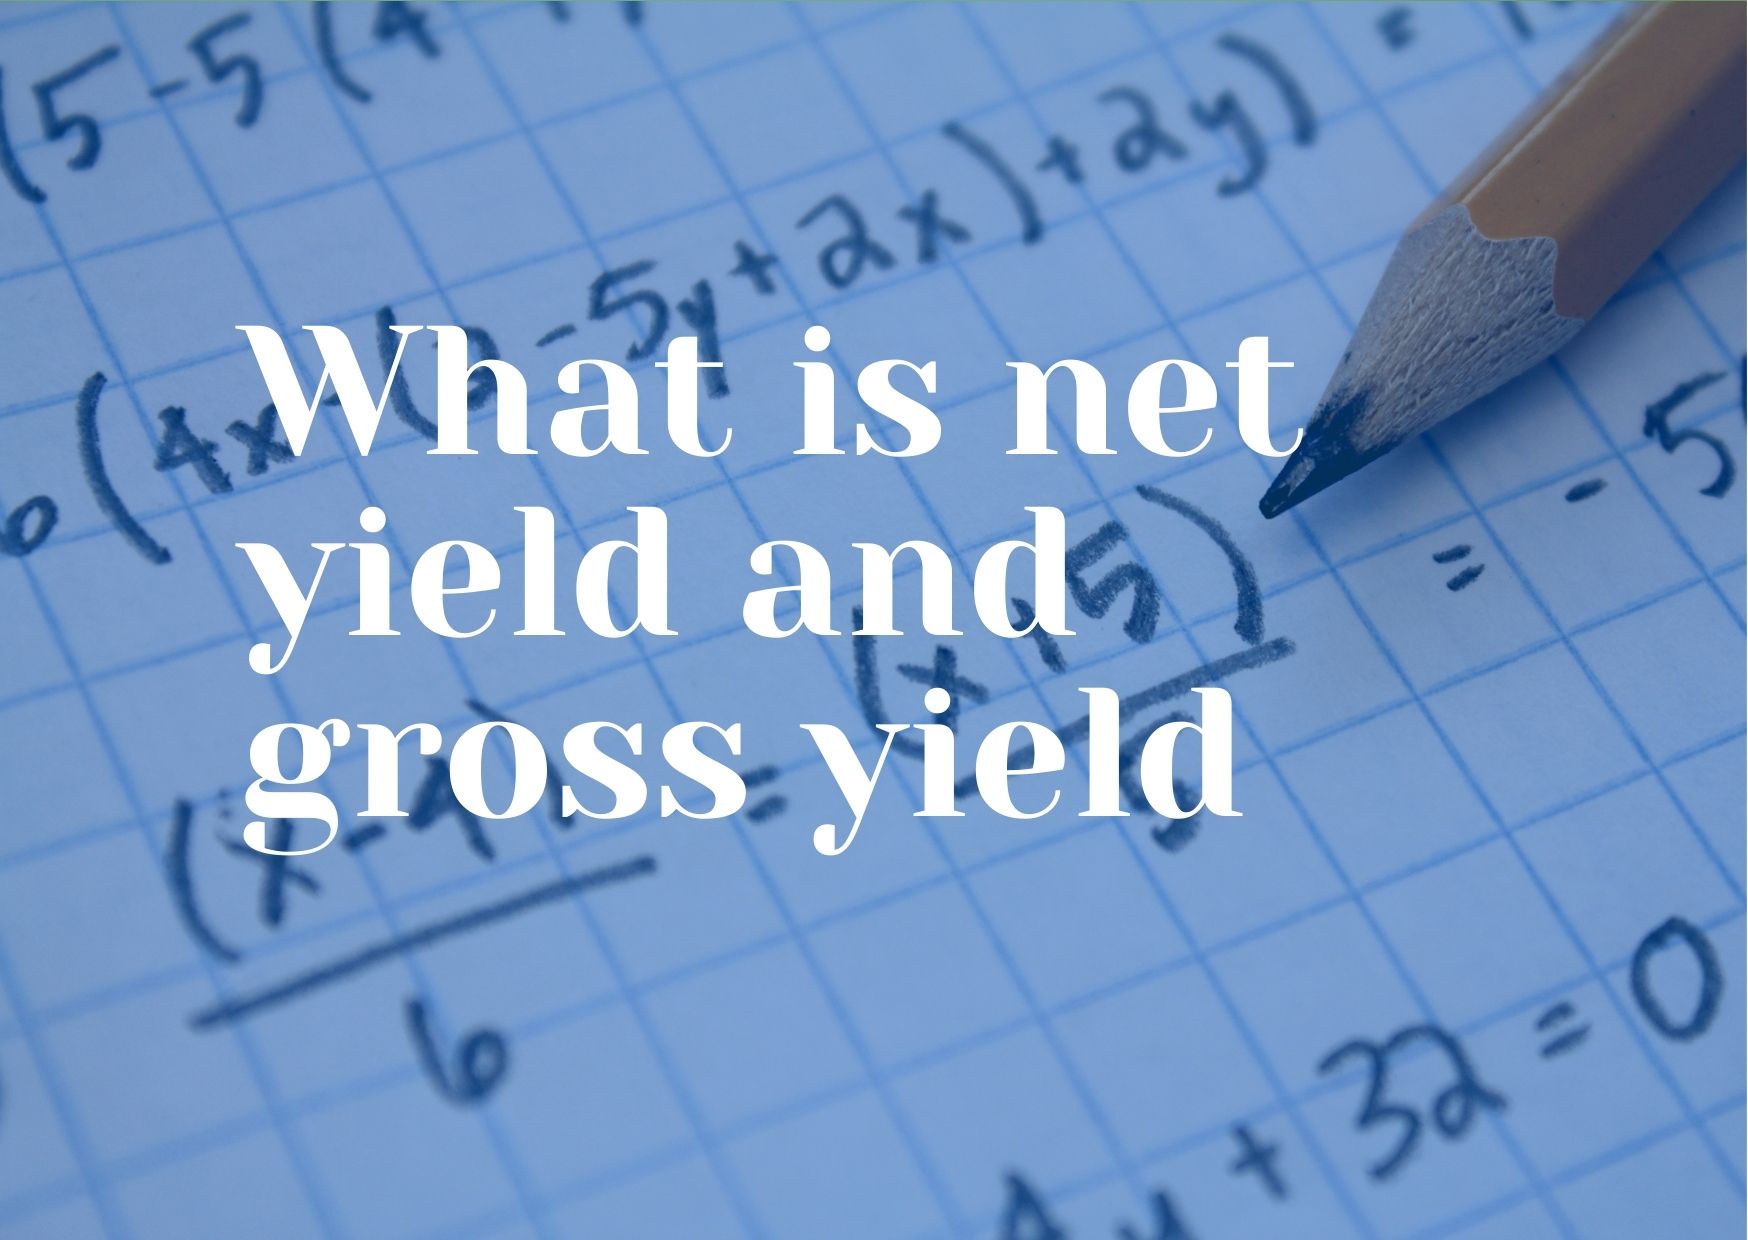 What Is Net Yield And Gross Yield?